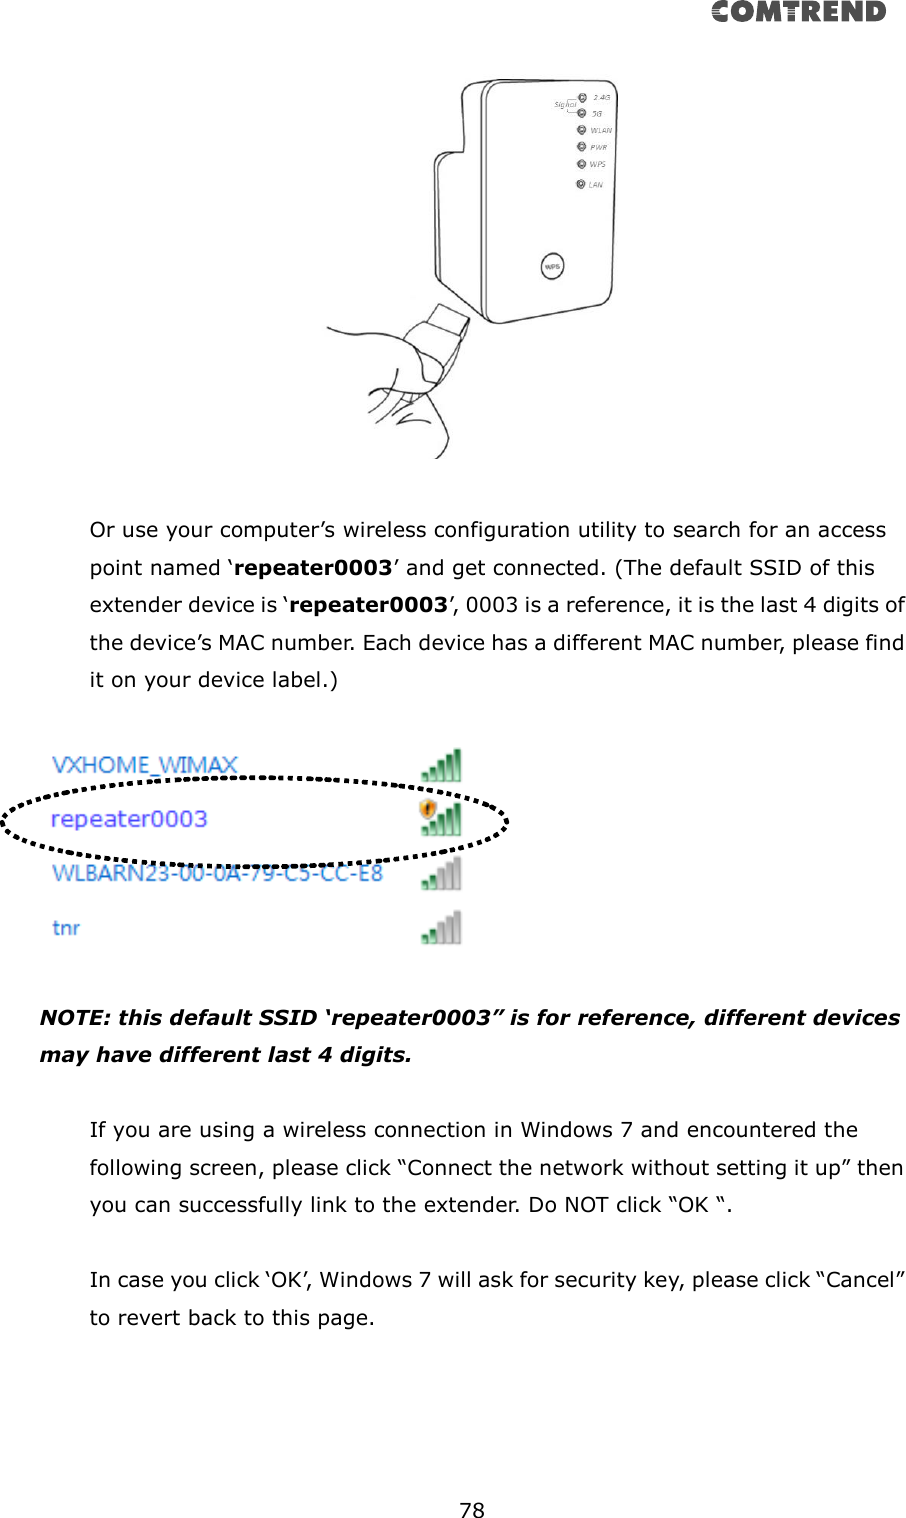       78    Or use your computer’s wireless configuration utility to search for an access point named ‘repeater0003’ and get connected. (The default SSID of this extender device is ‘repeater0003’, 0003 is a reference, it is the last 4 digits of the device’s MAC number. Each device has a different MAC number, please find it on your device label.)    NOTE: this default SSID ‘repeater0003” is for reference, different devices may have different last 4 digits.  If you are using a wireless connection in Windows 7 and encountered the following screen, please click “Connect the network without setting it up” then you can successfully link to the extender. Do NOT click “OK “.    In case you click ‘OK’, Windows 7 will ask for security key, please click “Cancel” to revert back to this page.  